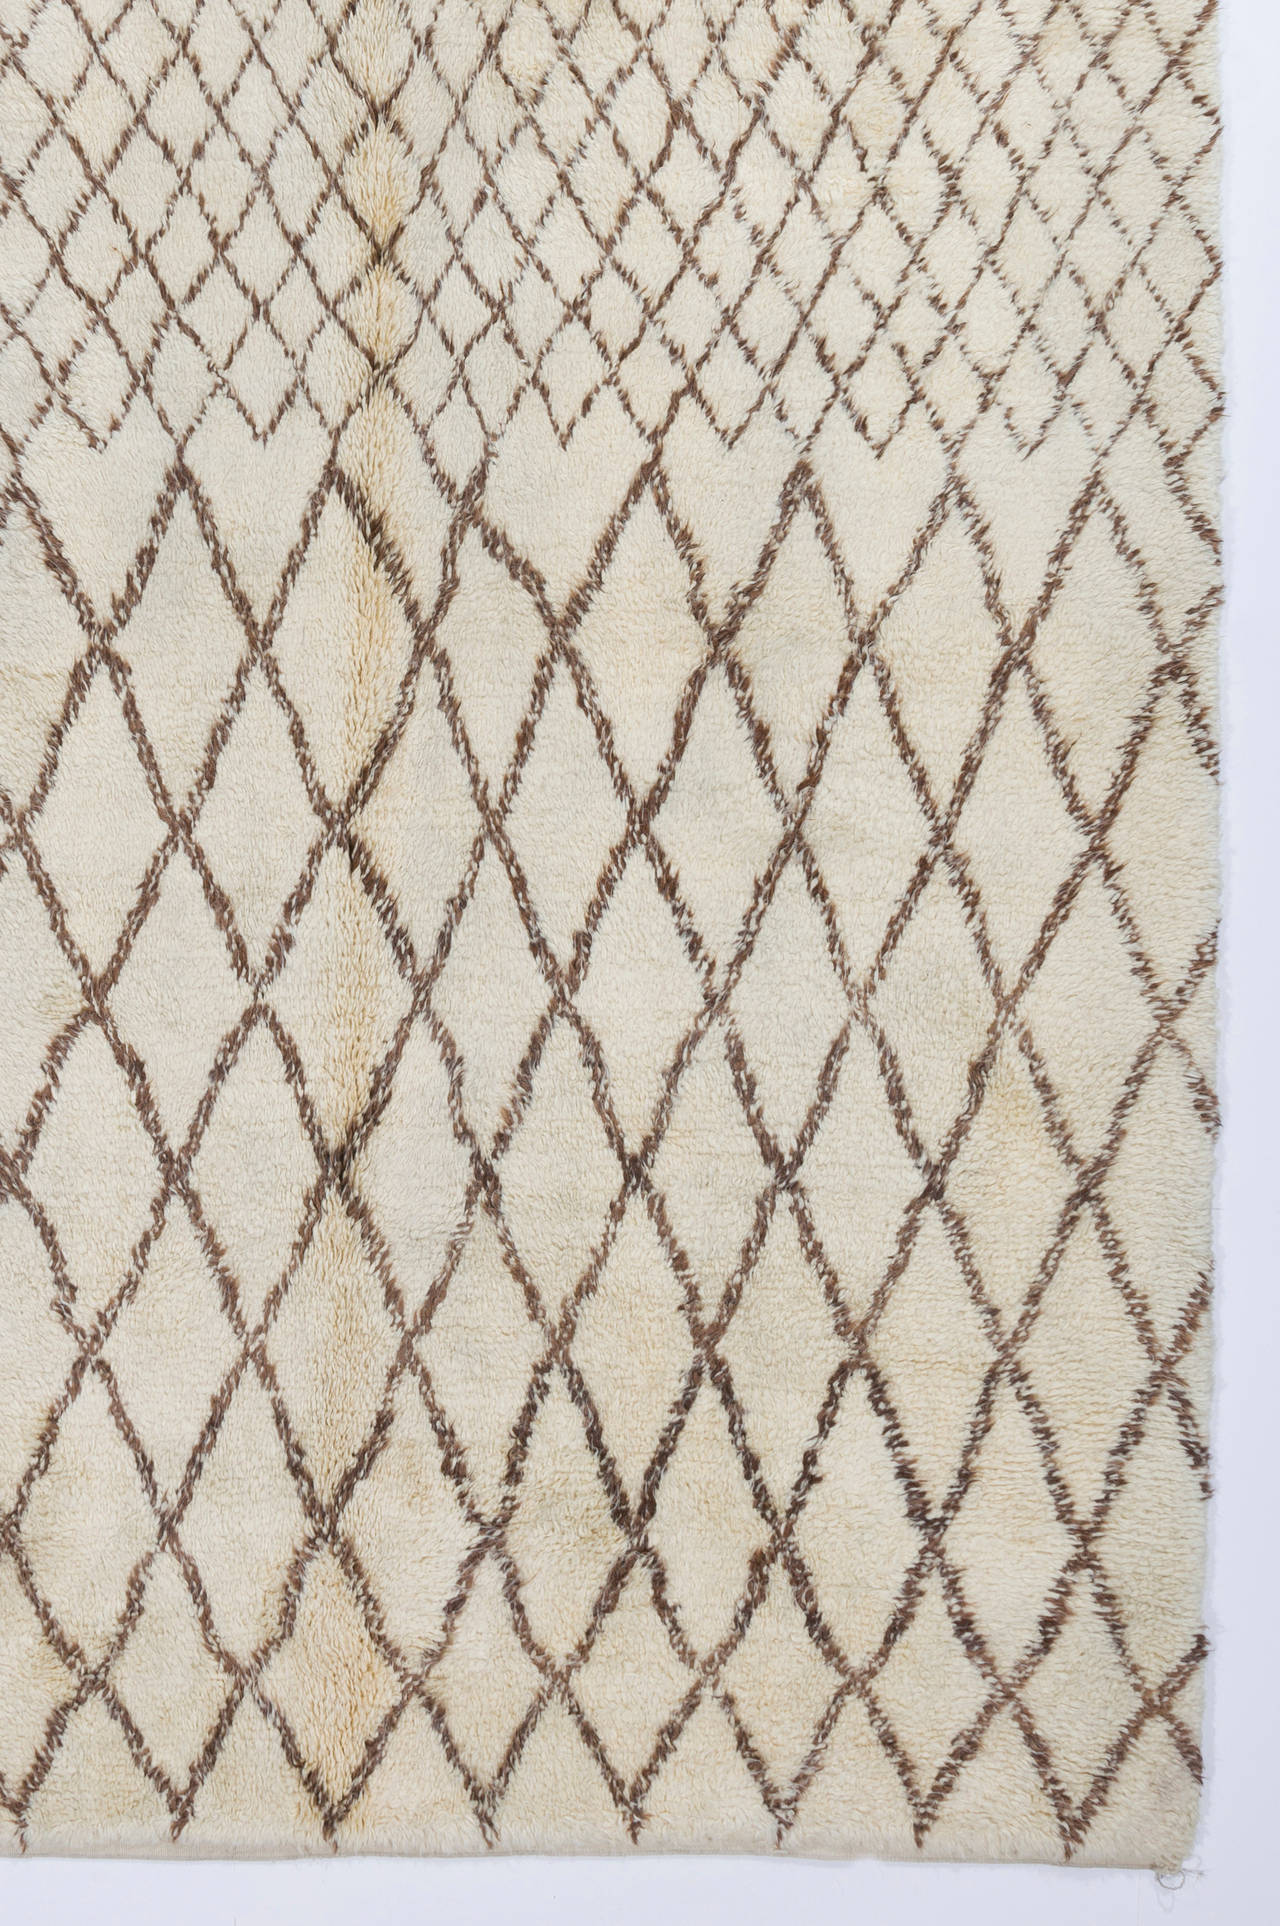 A contemporary handmade Moroccan rug with thick soft pile, made of natural undyed ivory/cream and brown wool.
Very soft and comfy, pleasure to walk or lay on. Available as it is, in various other sizes or made to measure in any size and color